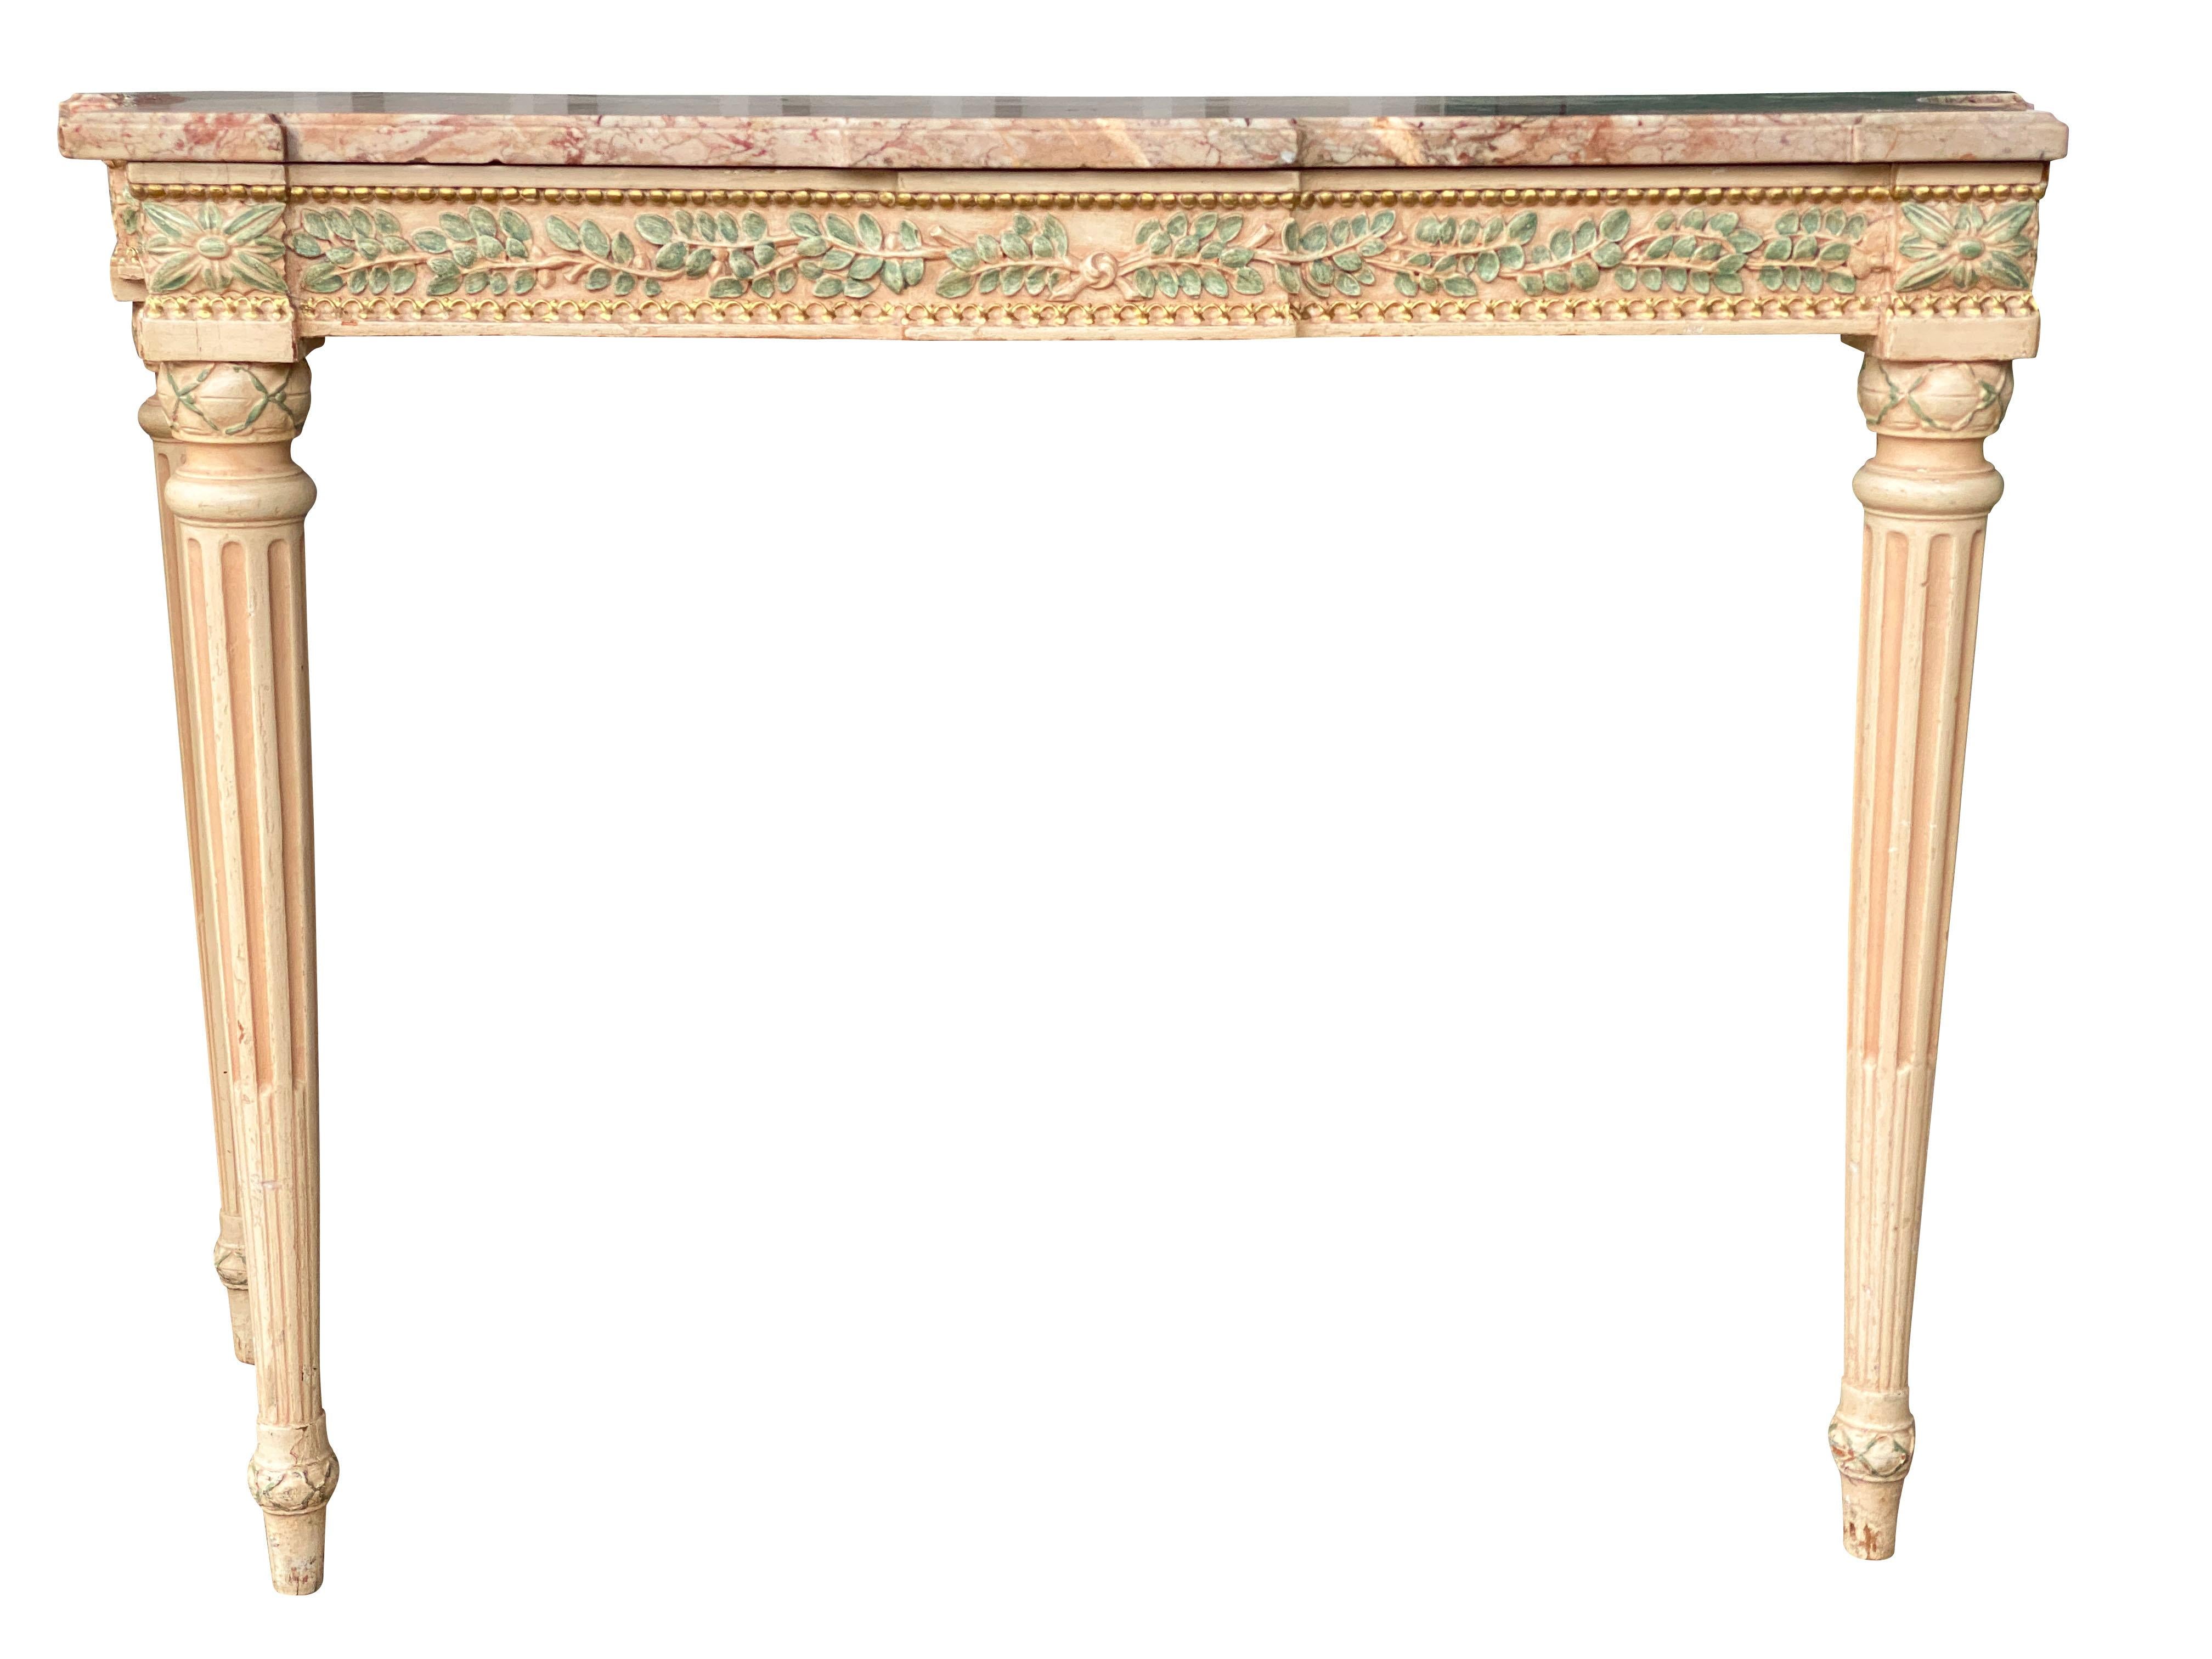 With shaped rectangular marble tops and conforming carved frieze decorated with green painted laurel leaves and gilding, raised on circular tapered fluted legs. Original furnishings from the Waldorf Astoria Hotel circa 1931. With original labels.